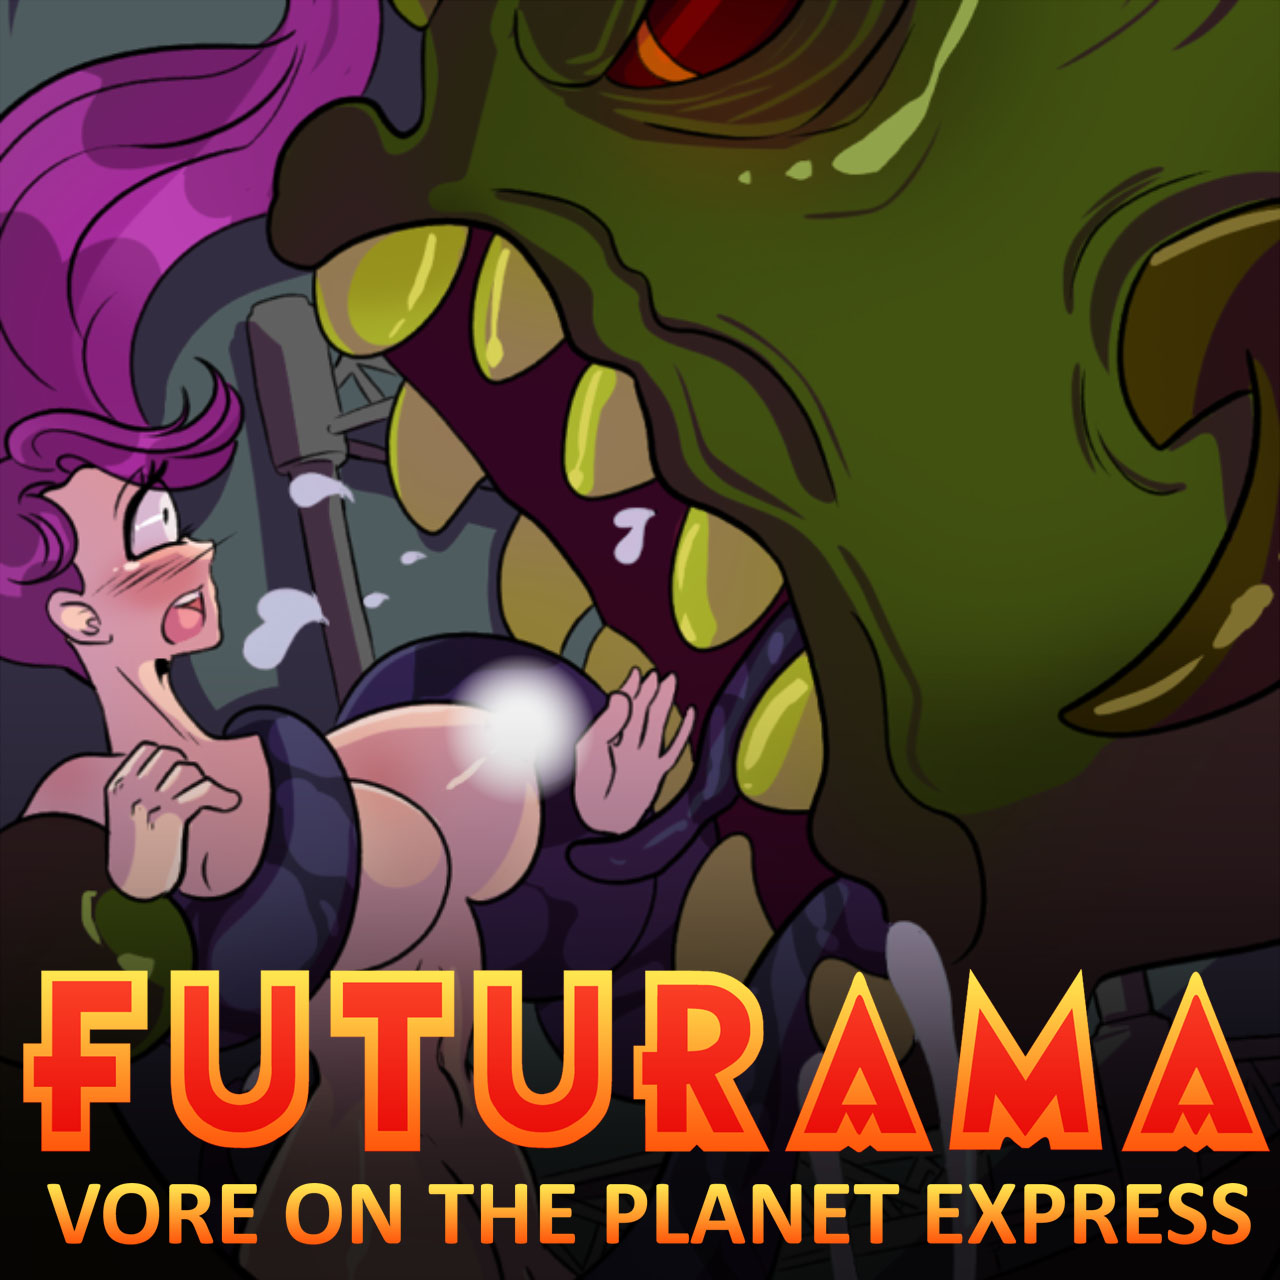 Futurama: Vore on the Planet Express